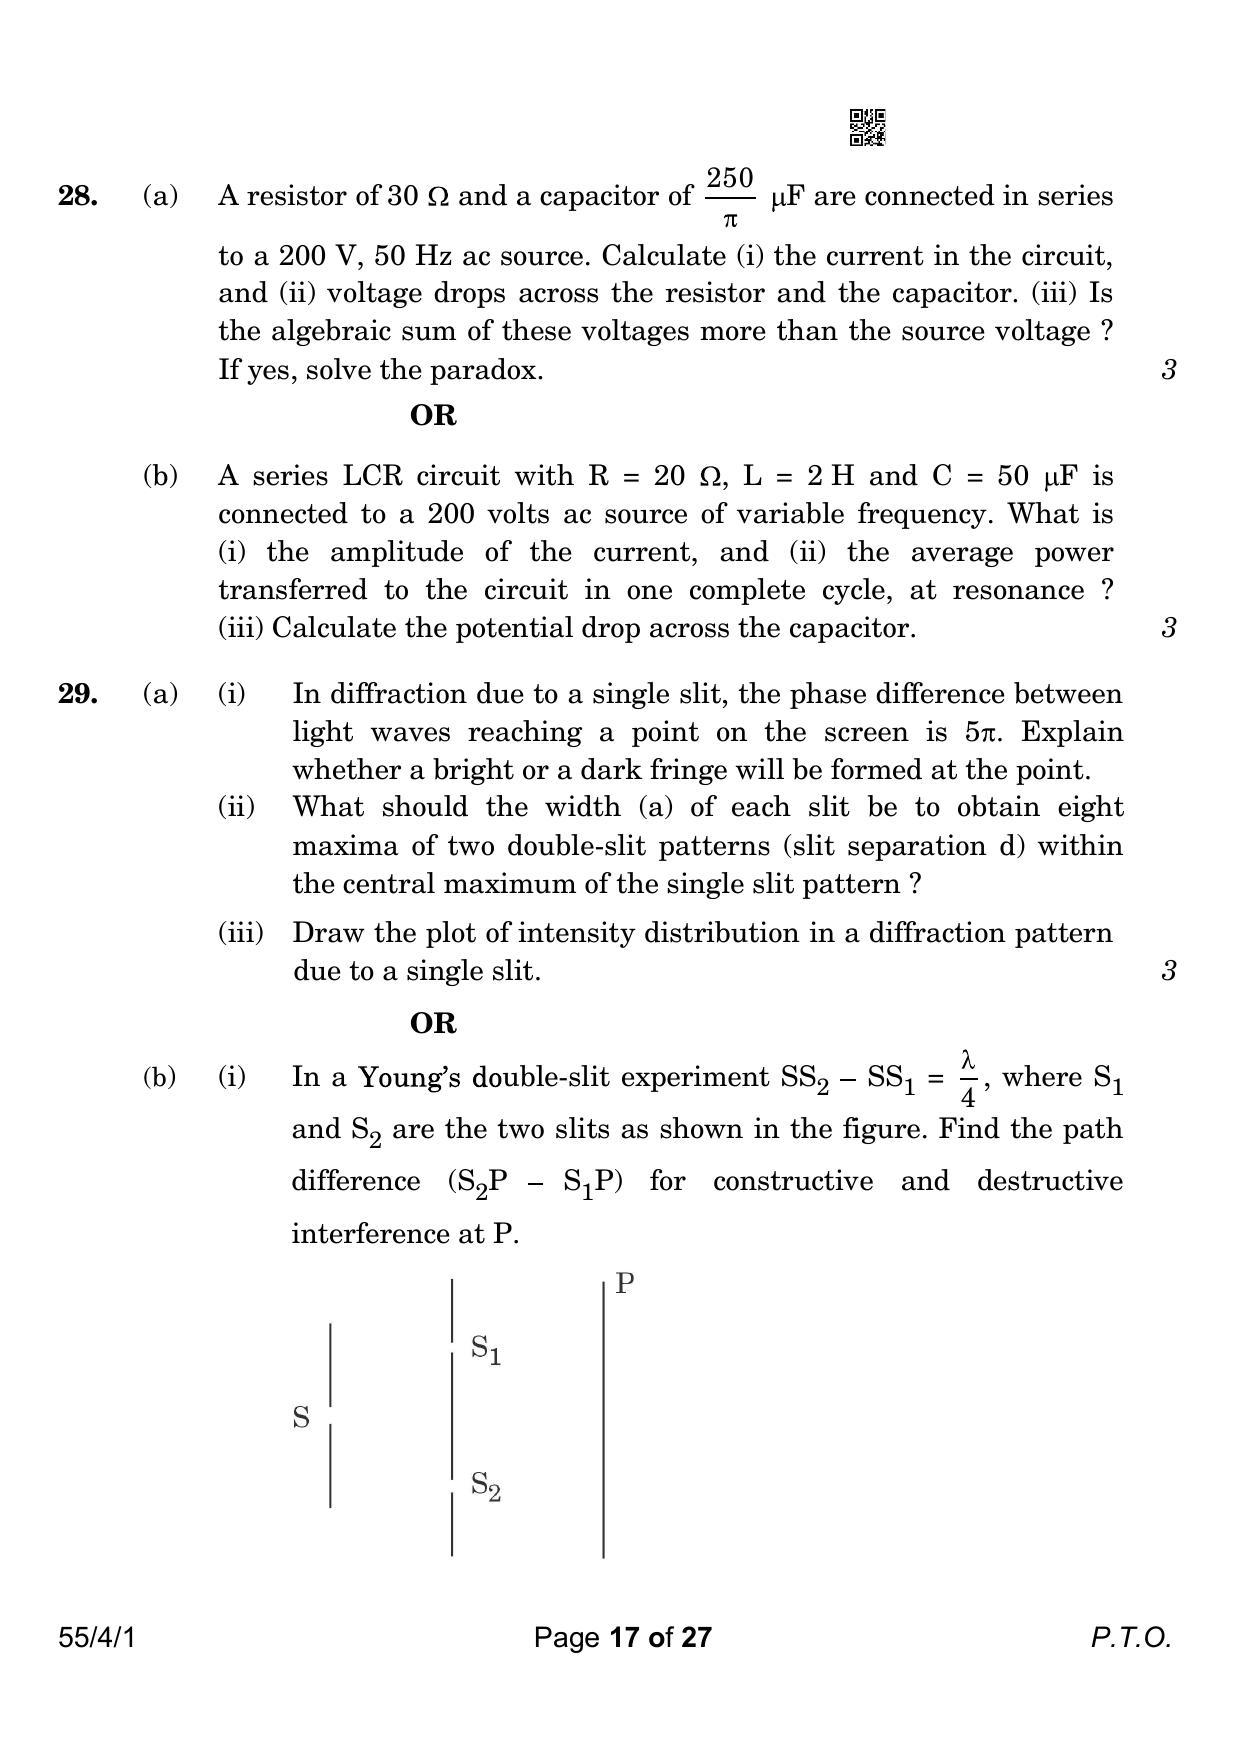 CBSE Class 12 55-4-1 Physics 2023 Question Paper - Page 17